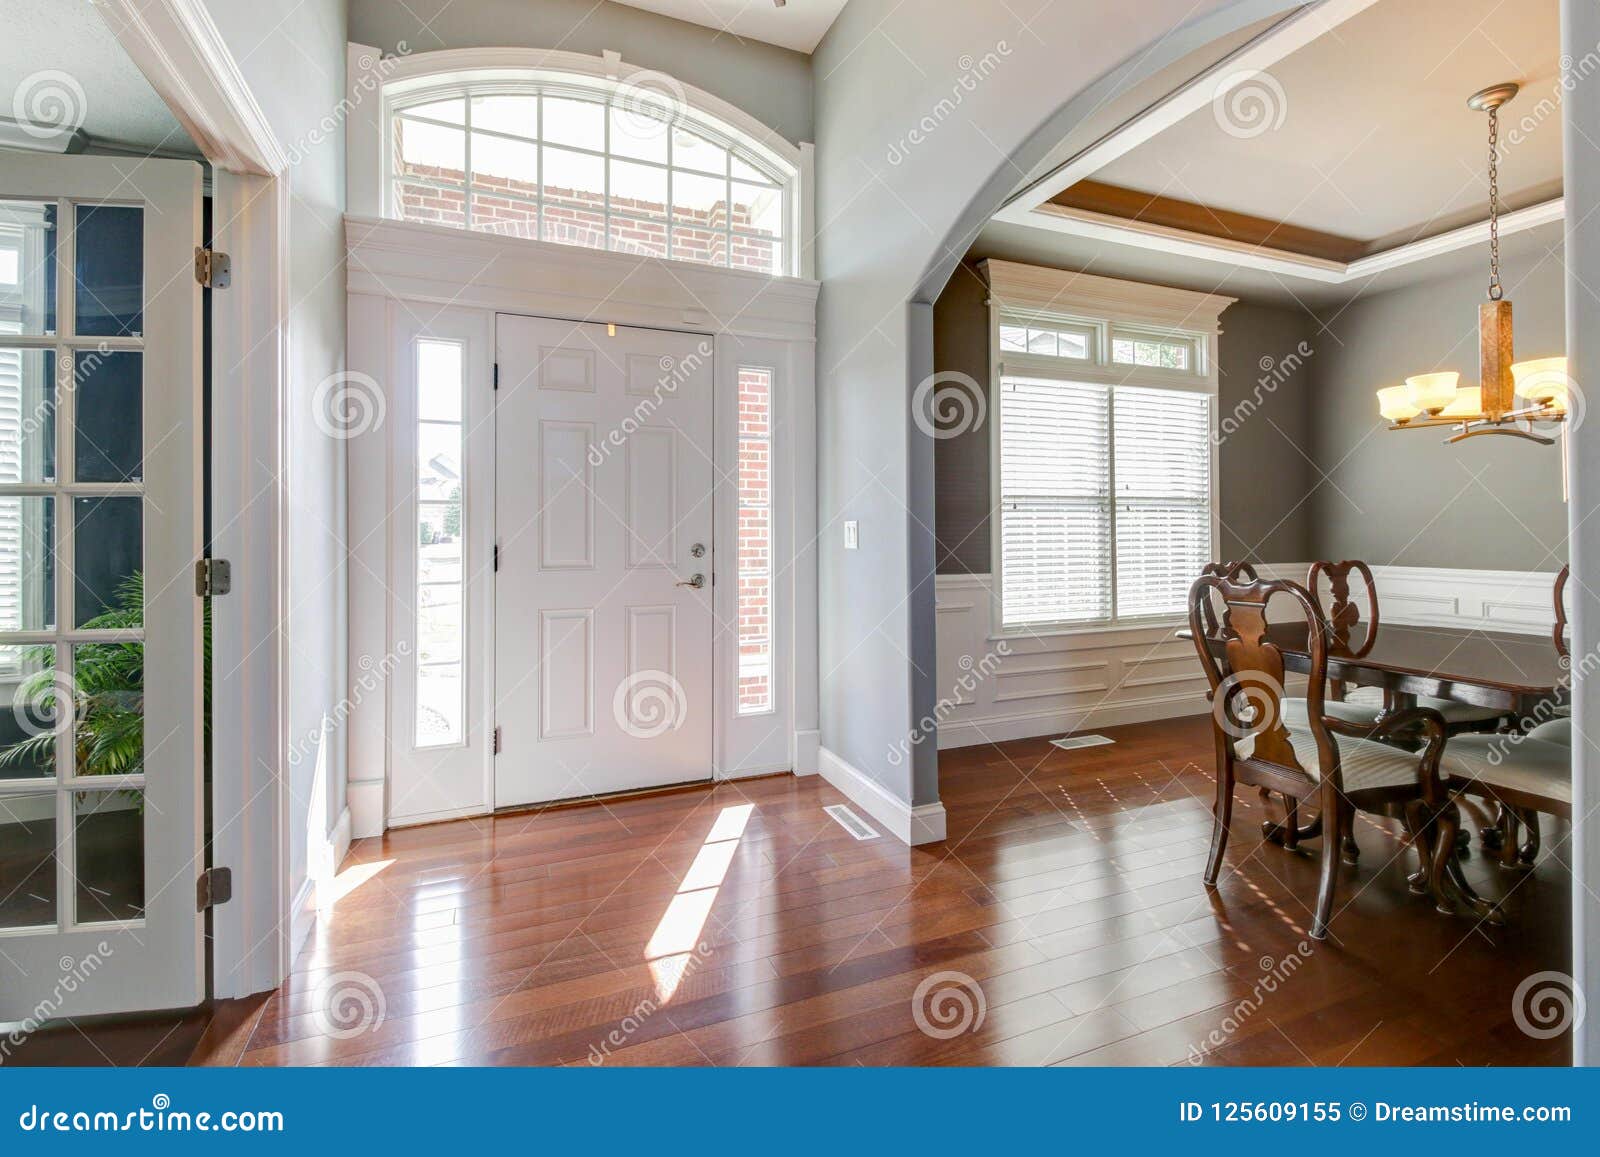 Bright Foyer With View Of Dining Room And Parlor Stock